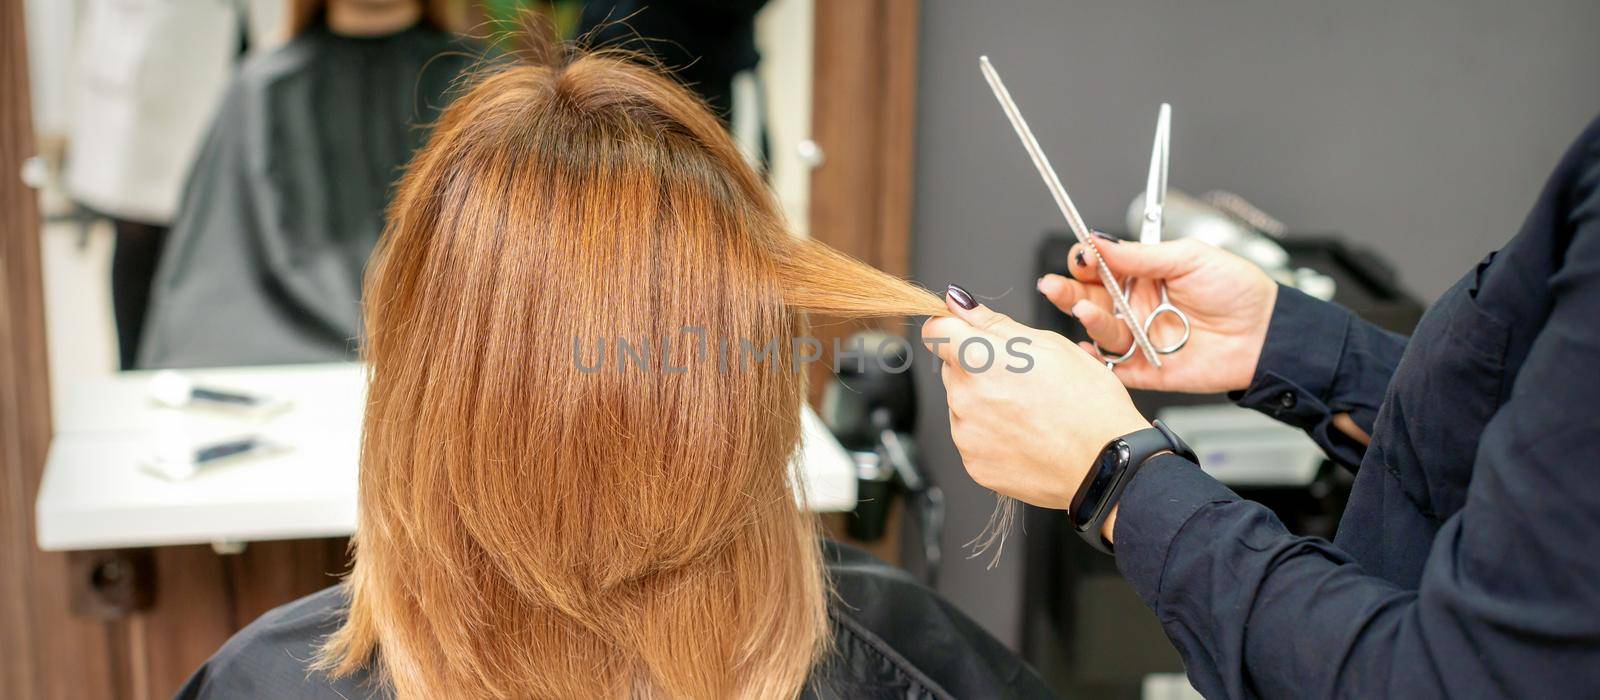 Red-haired woman sitting a front of the mirror and receiving haircut her red long hair by a female hairdresser in a hair salon, back view. by okskukuruza